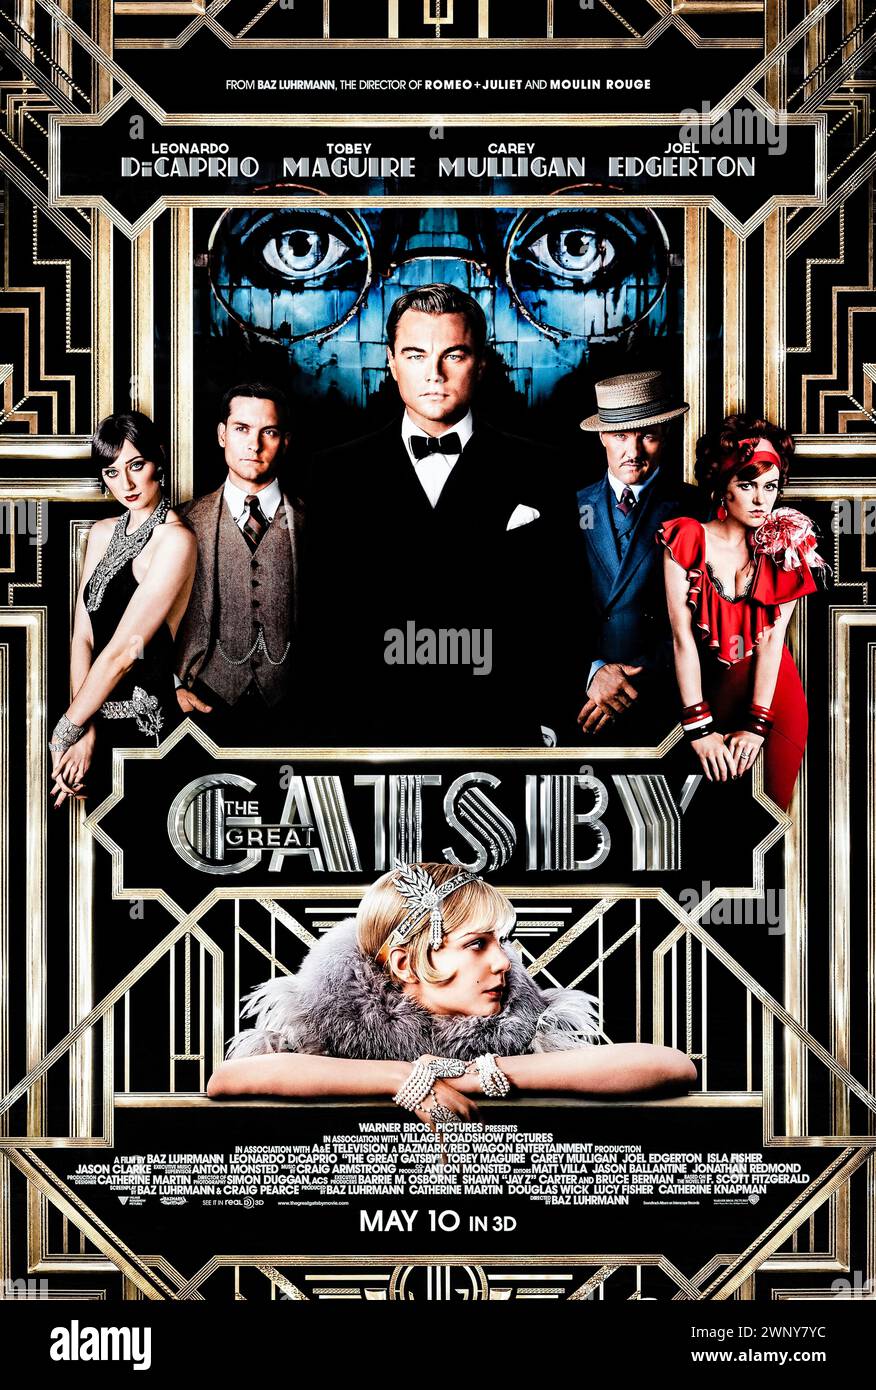 The Great Gatsby (2013) directed by Baz Luhrmann and starring Leonardo DiCaprio, Carey Mulligan and Joel Edgerton. Big screen adaptation of F. Scott Fitzgerald's Long Island-set novel, where Midwesterner Nick Carraway is lured into the lavish world of his neighbor, Jay Gatsby. Photograph of an original 2013 us one sheet poster. ***EDITORIAL USE ONLY*** Credit: BFA / Warner Bros Stock Photo